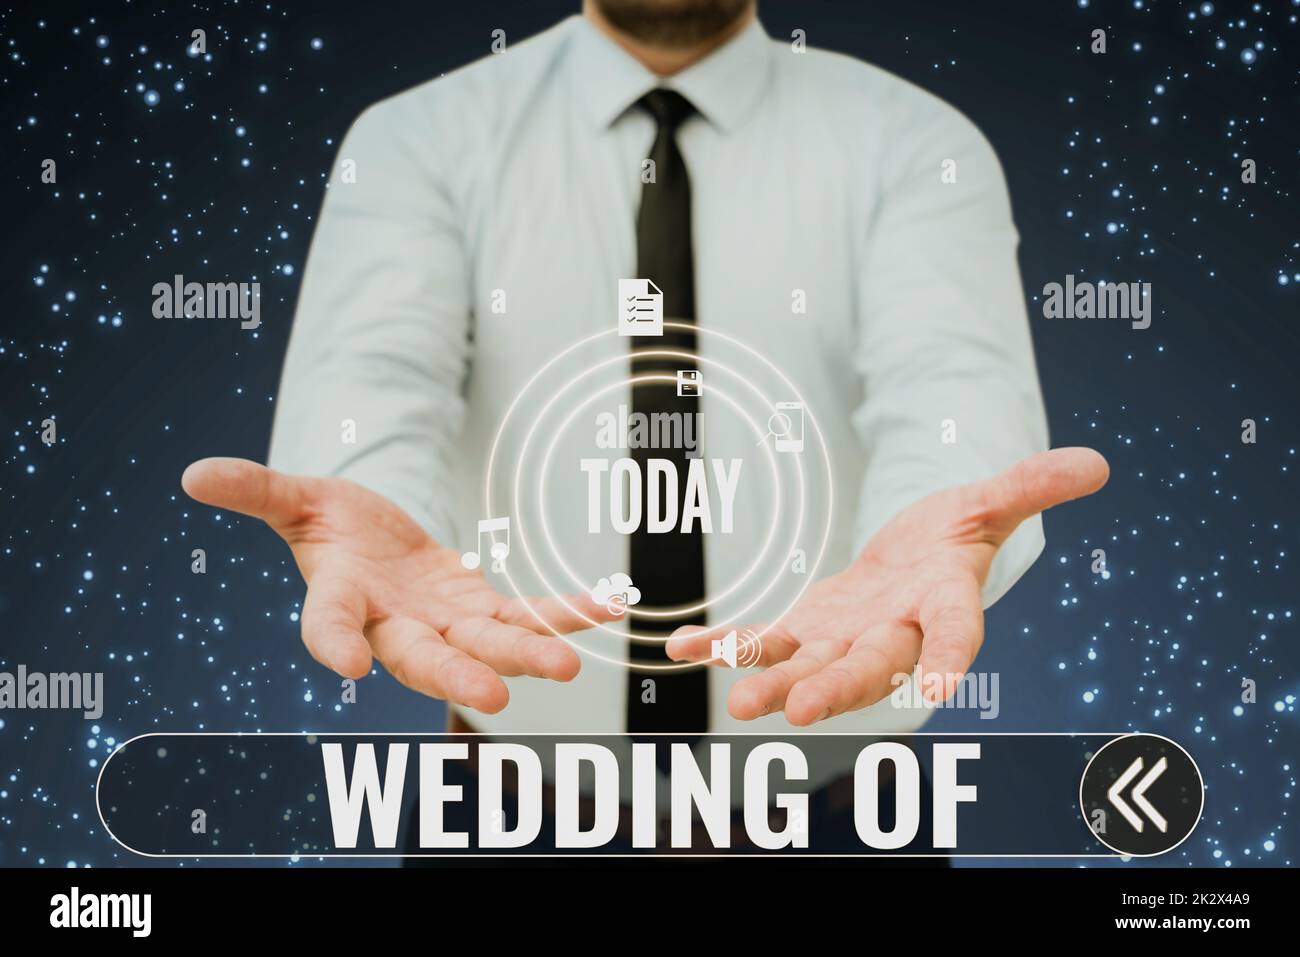 Sign displaying Wedding Of. Business approach announcing that man and now as married couple forever Businessman in suit holding open palms represents innovative thinking. Stock Photo